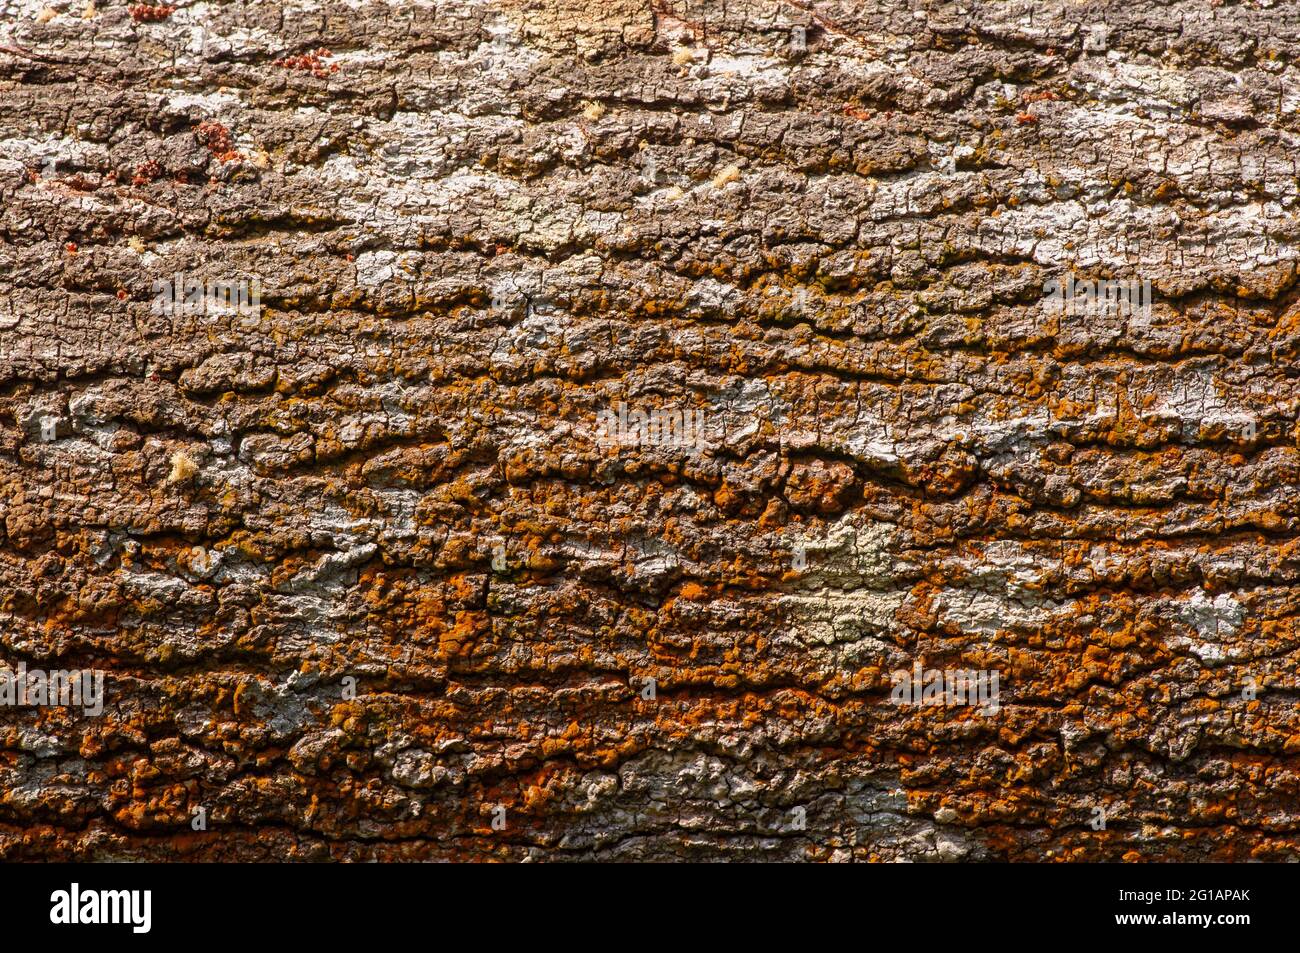 Tree bark of  Acacia hybrid plant. The Acacia hybrid is a medium-sized tree that is similar in appearance to Acacia mangium. Natural background. Stock Photo